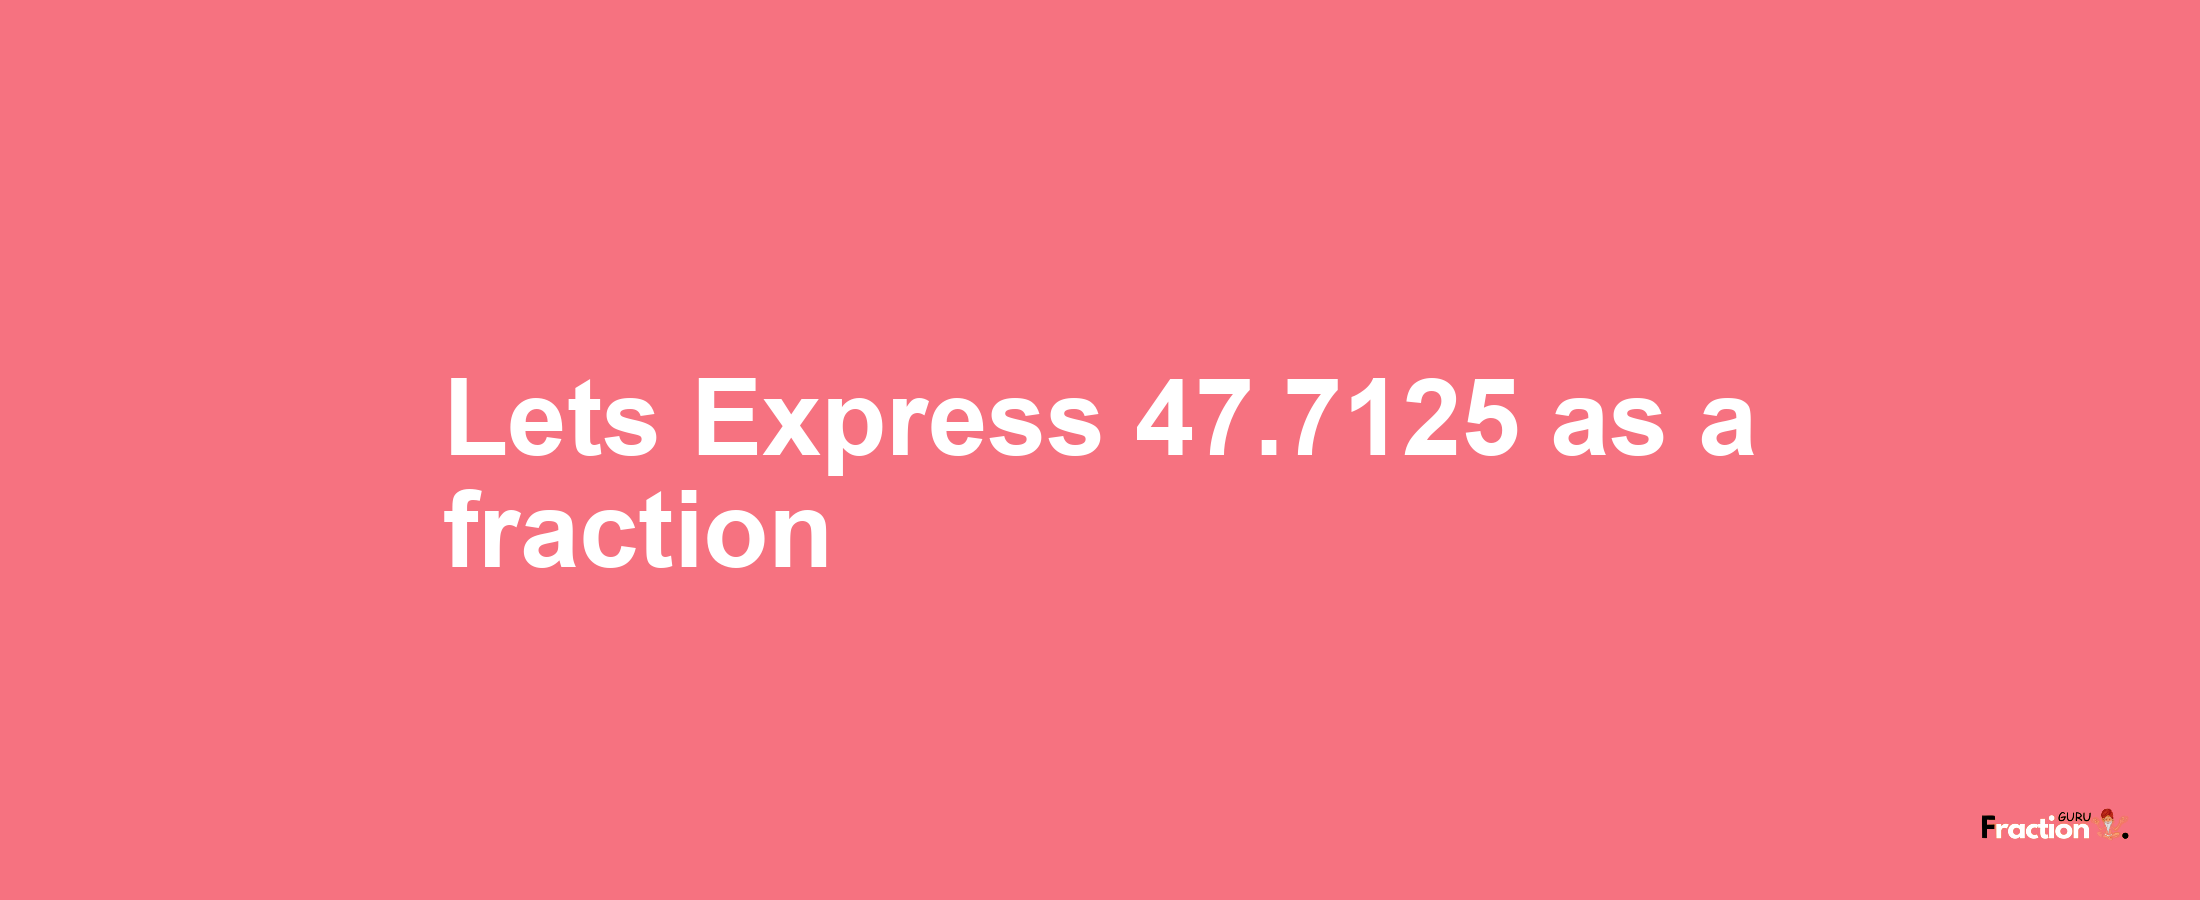 Lets Express 47.7125 as afraction